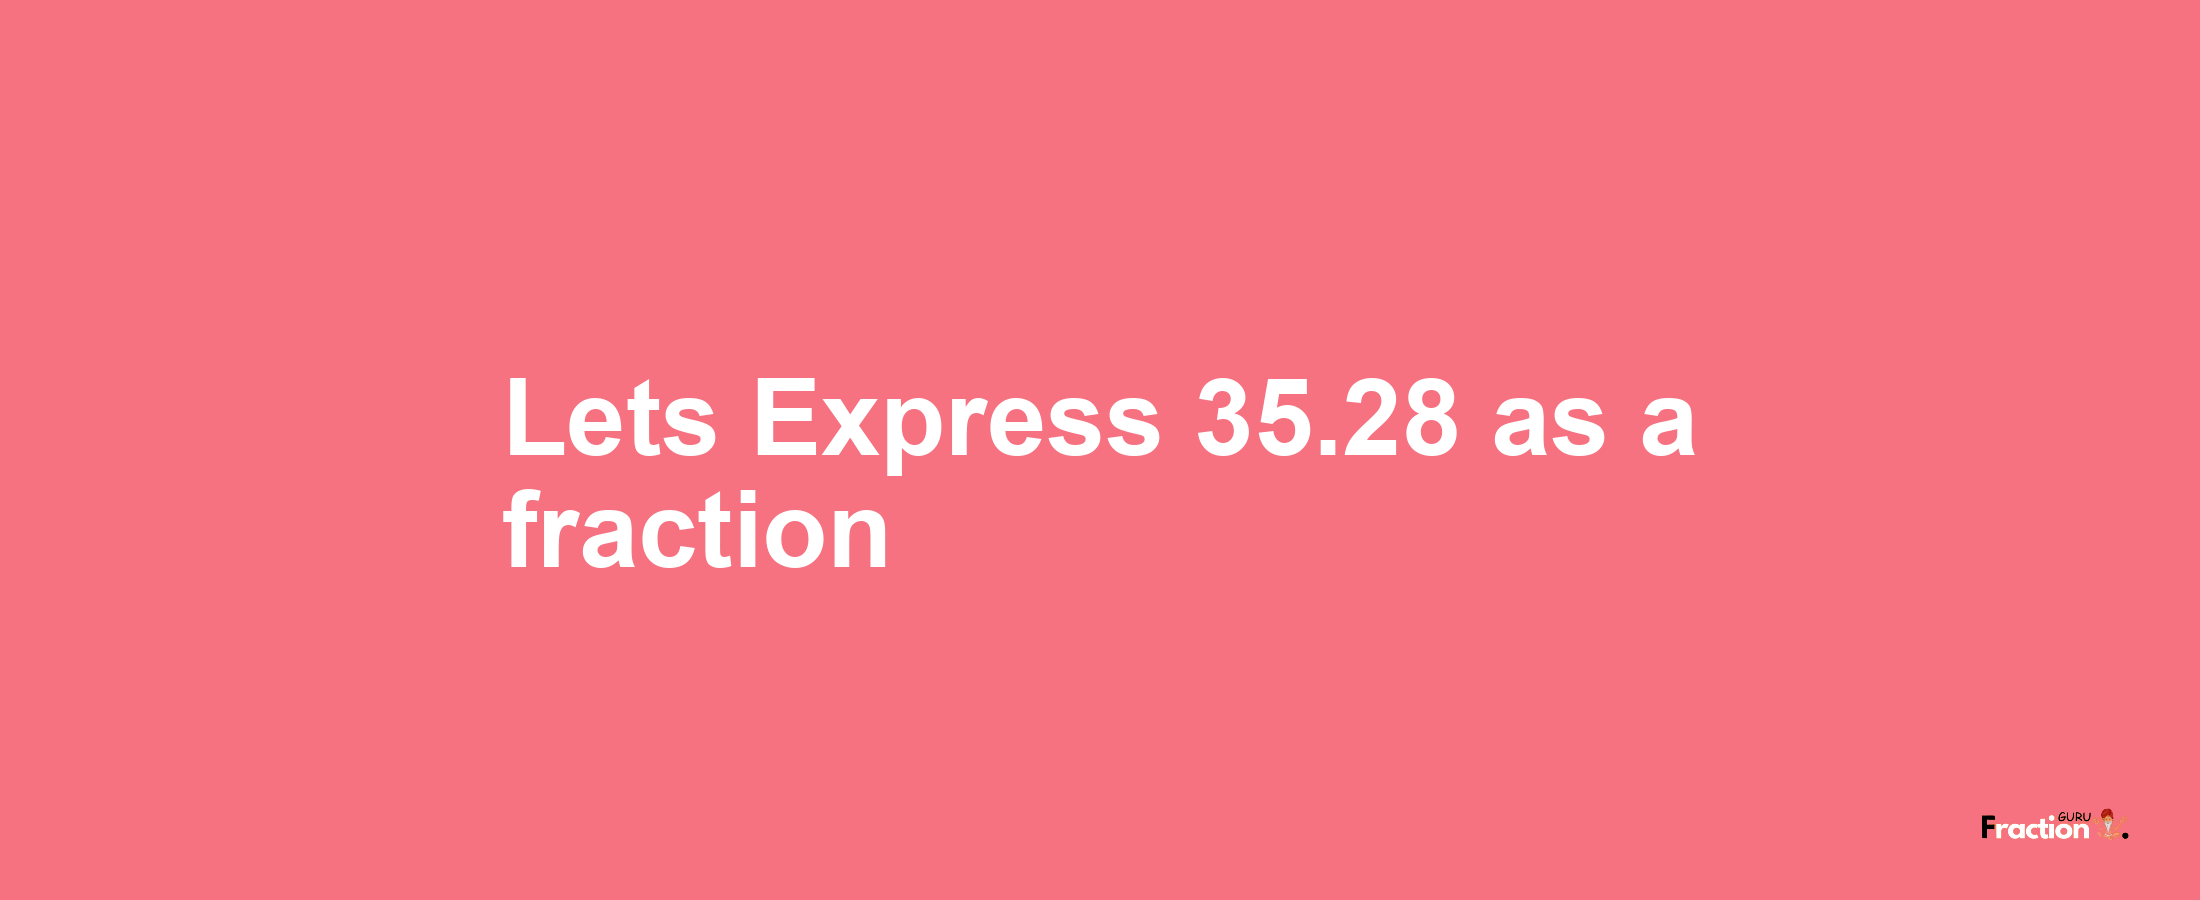 Lets Express 35.28 as afraction